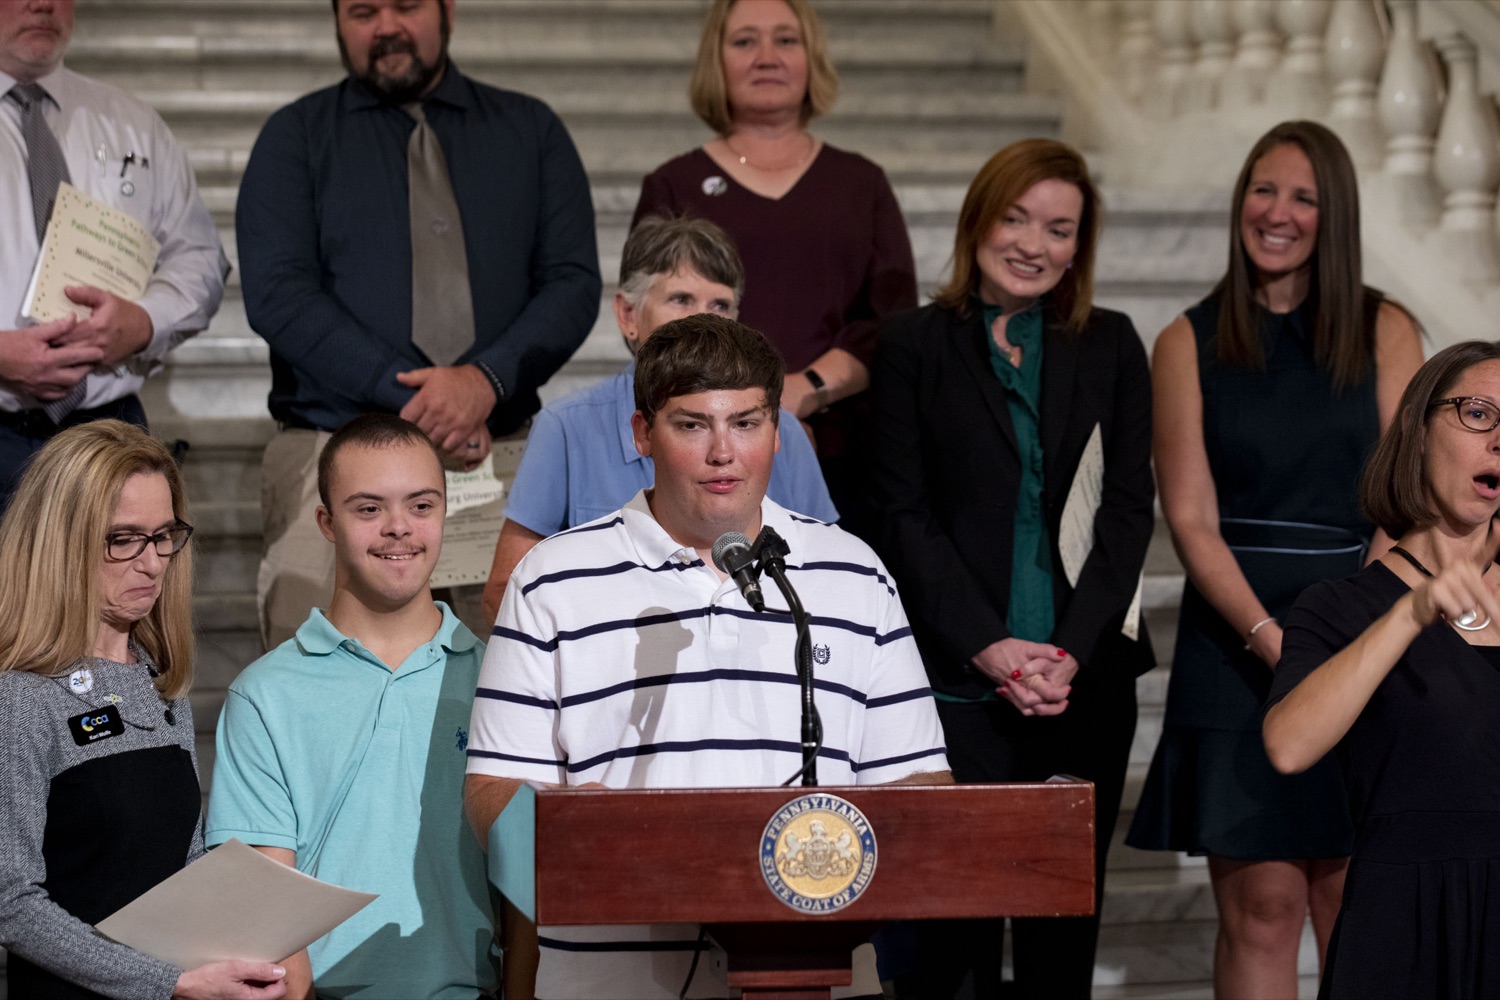 Logan Weldy, Commonweath Charter Academy Recent graduate, speaks about his school's environmental sustainability efforts, in Harrisburg, PA on September 20, 2022.<br><a href="https://filesource.amperwave.net/commonwealthofpa/photo/22151_dcnr_pathways_cz_24.jpg" target="_blank">⇣ Download Photo</a>